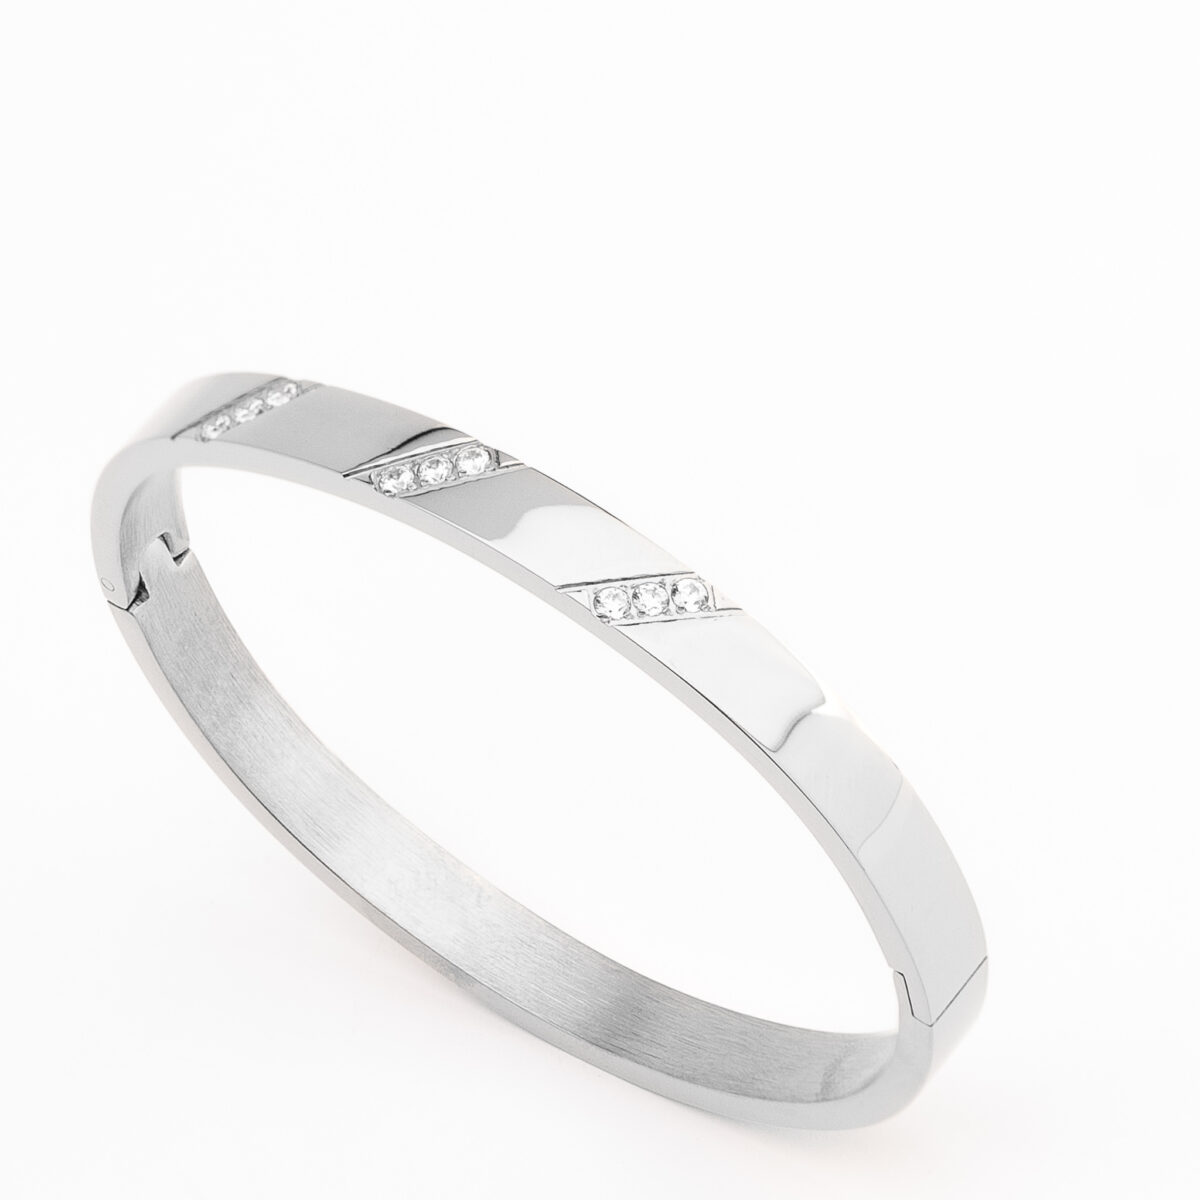 https://m.clubbella.co/product/siena-silver-bangle/ Siena Silver Bnagle (1)